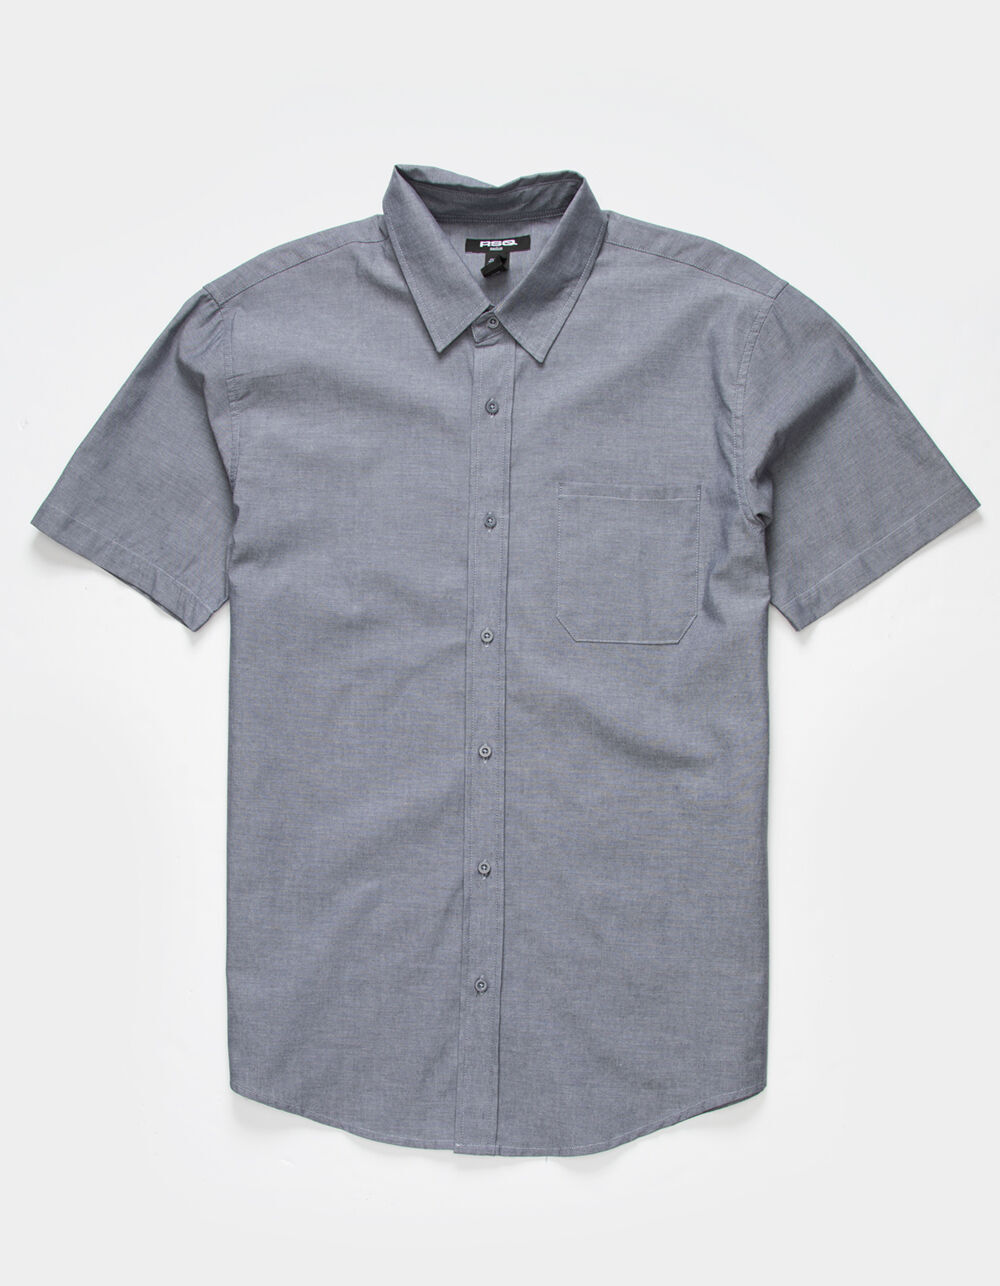 RSQ Boys Solid Chambray Button Up Shirt